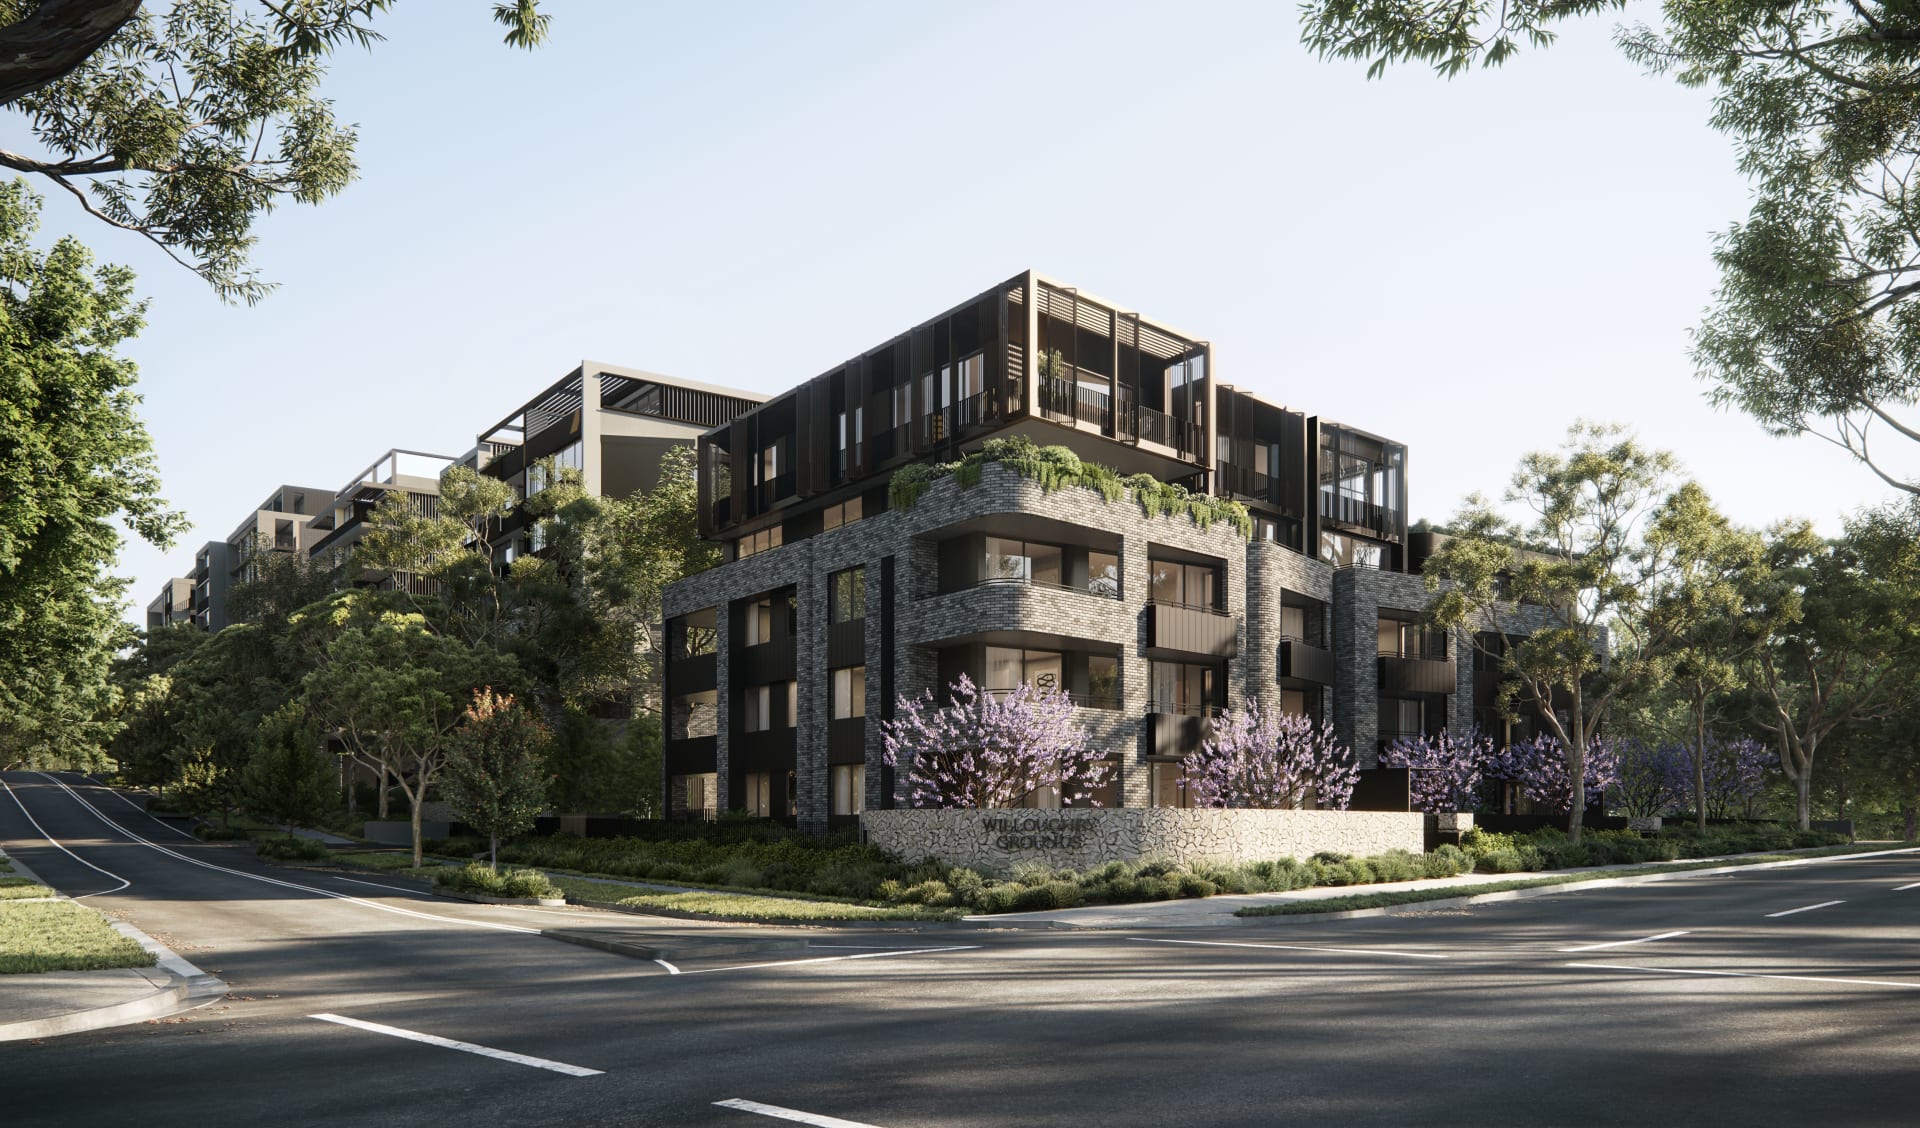 Willoughby Grounds launches, merging architecture and history in Sydney's lower North Shore